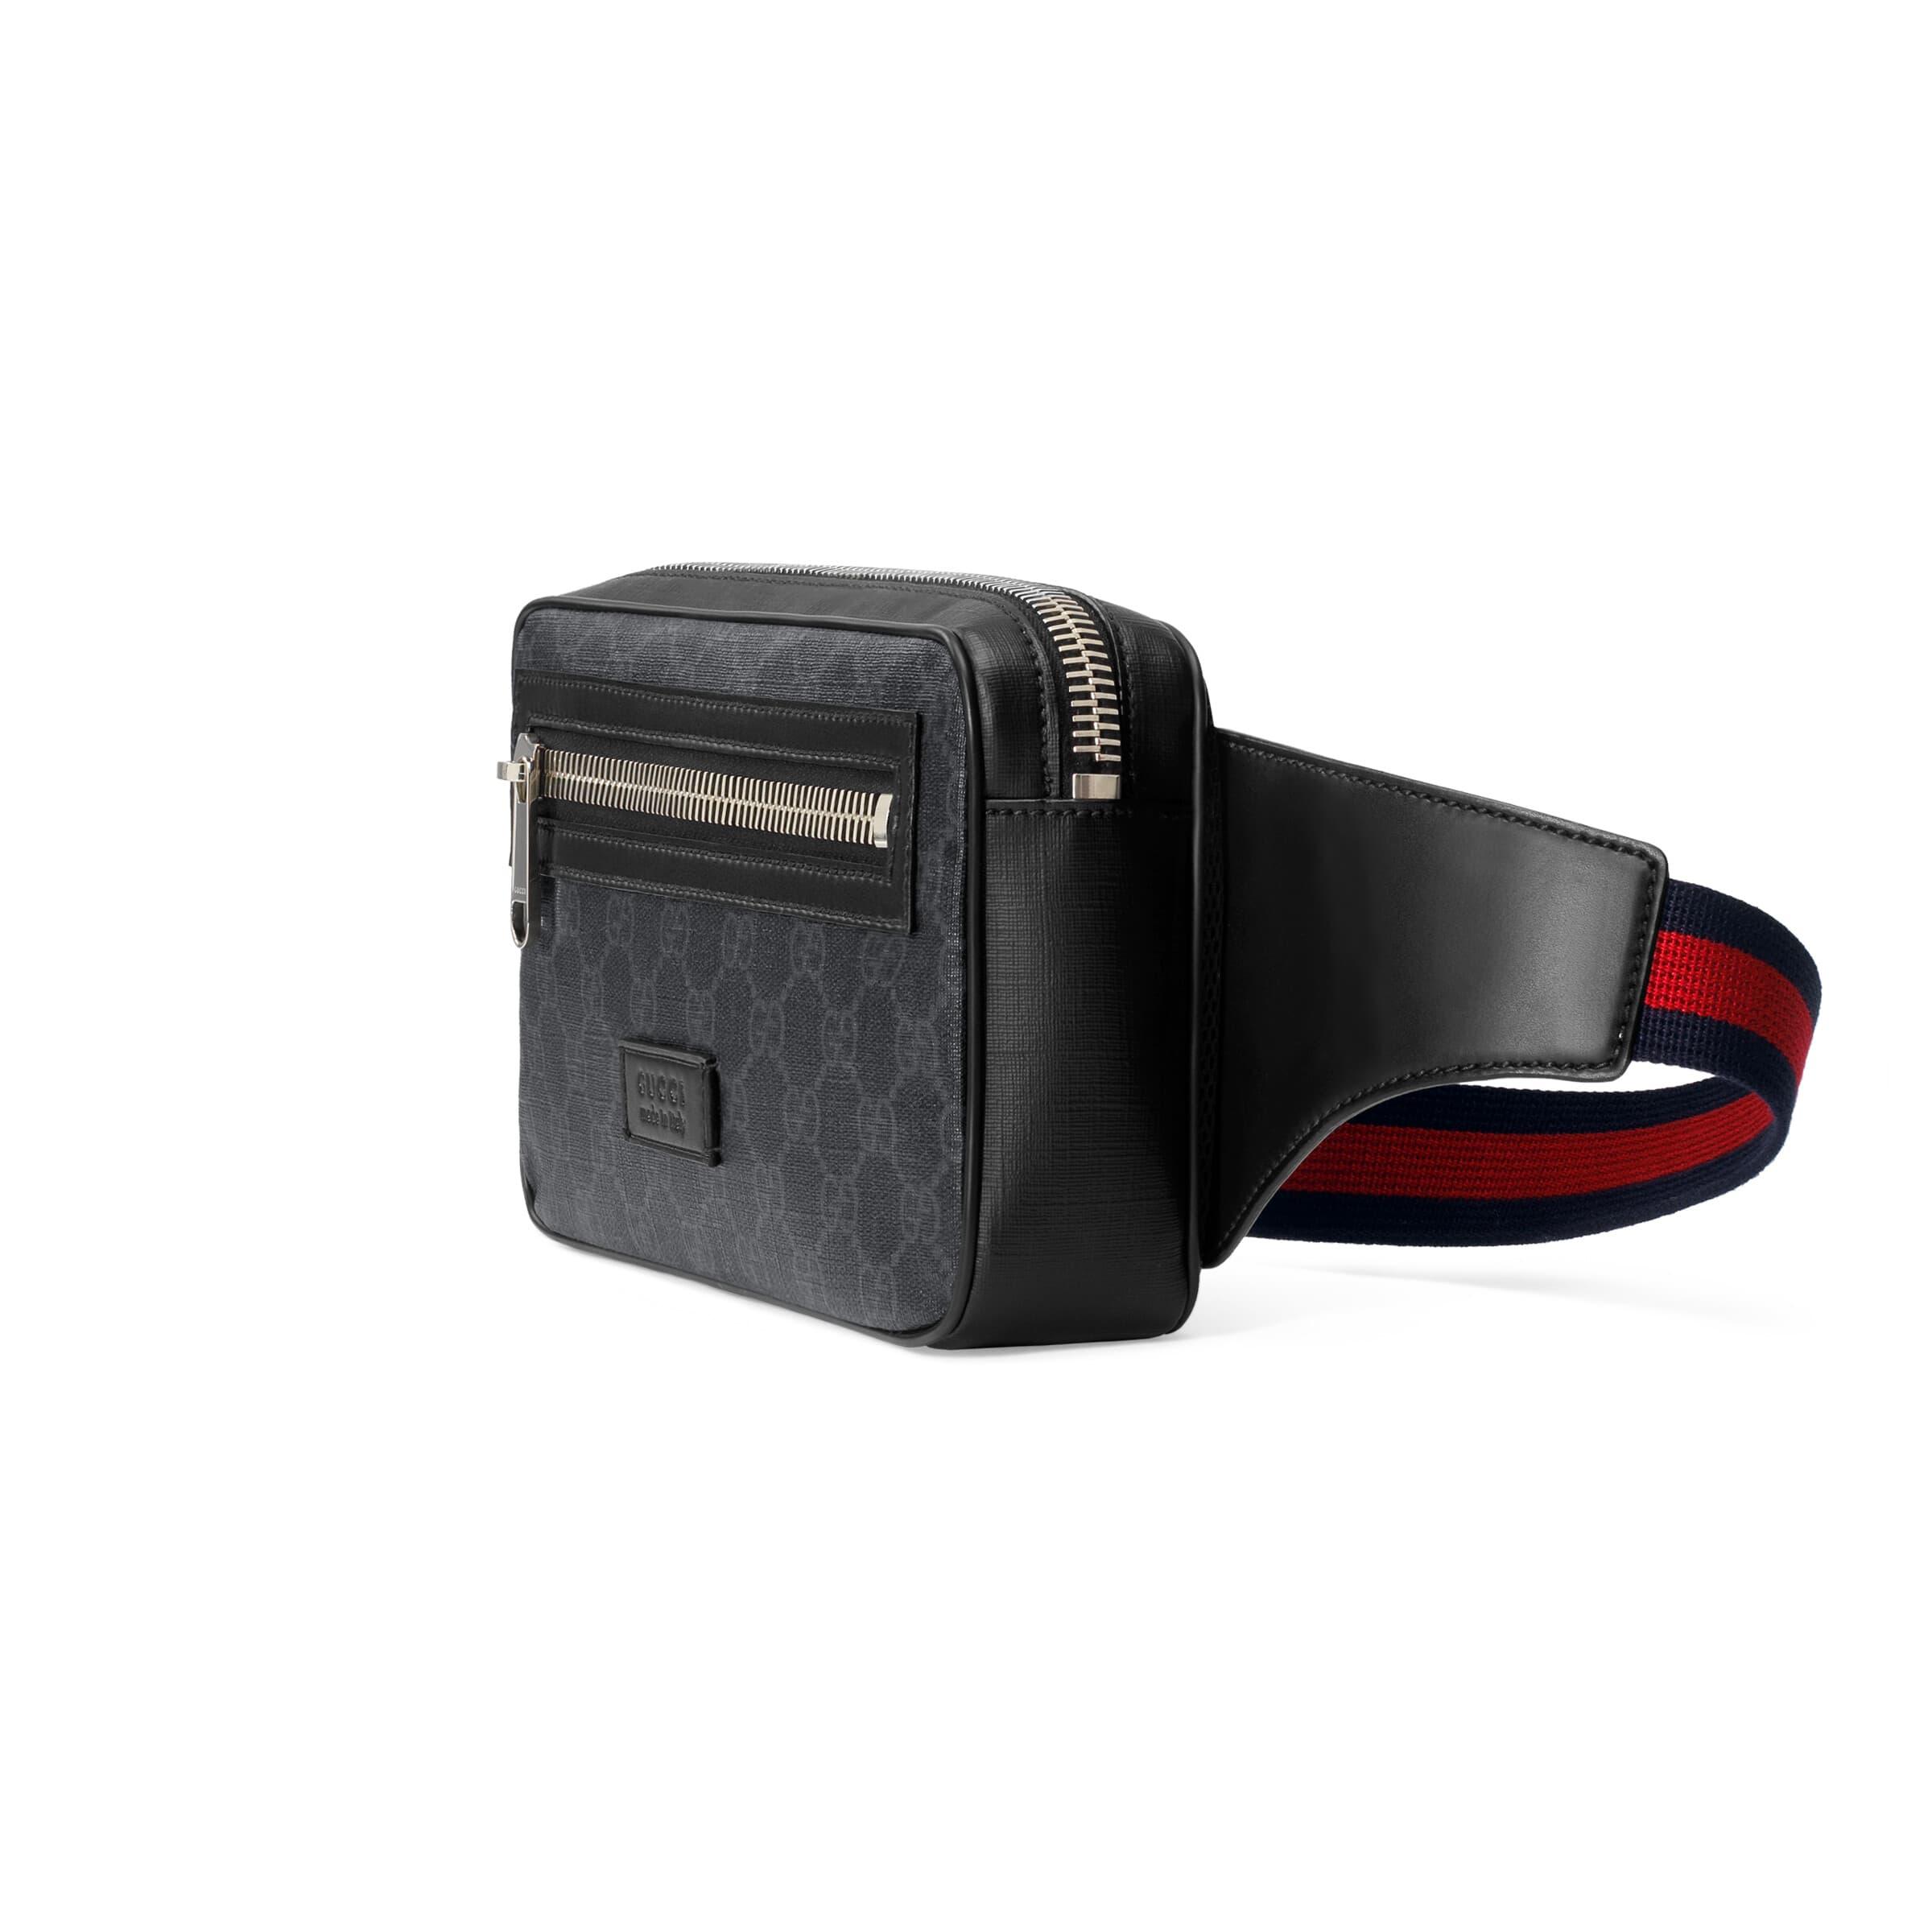 Gucci Ophidia Belt Bag Grey/Black in GG Supreme Canvas with Palladium-tone  - US